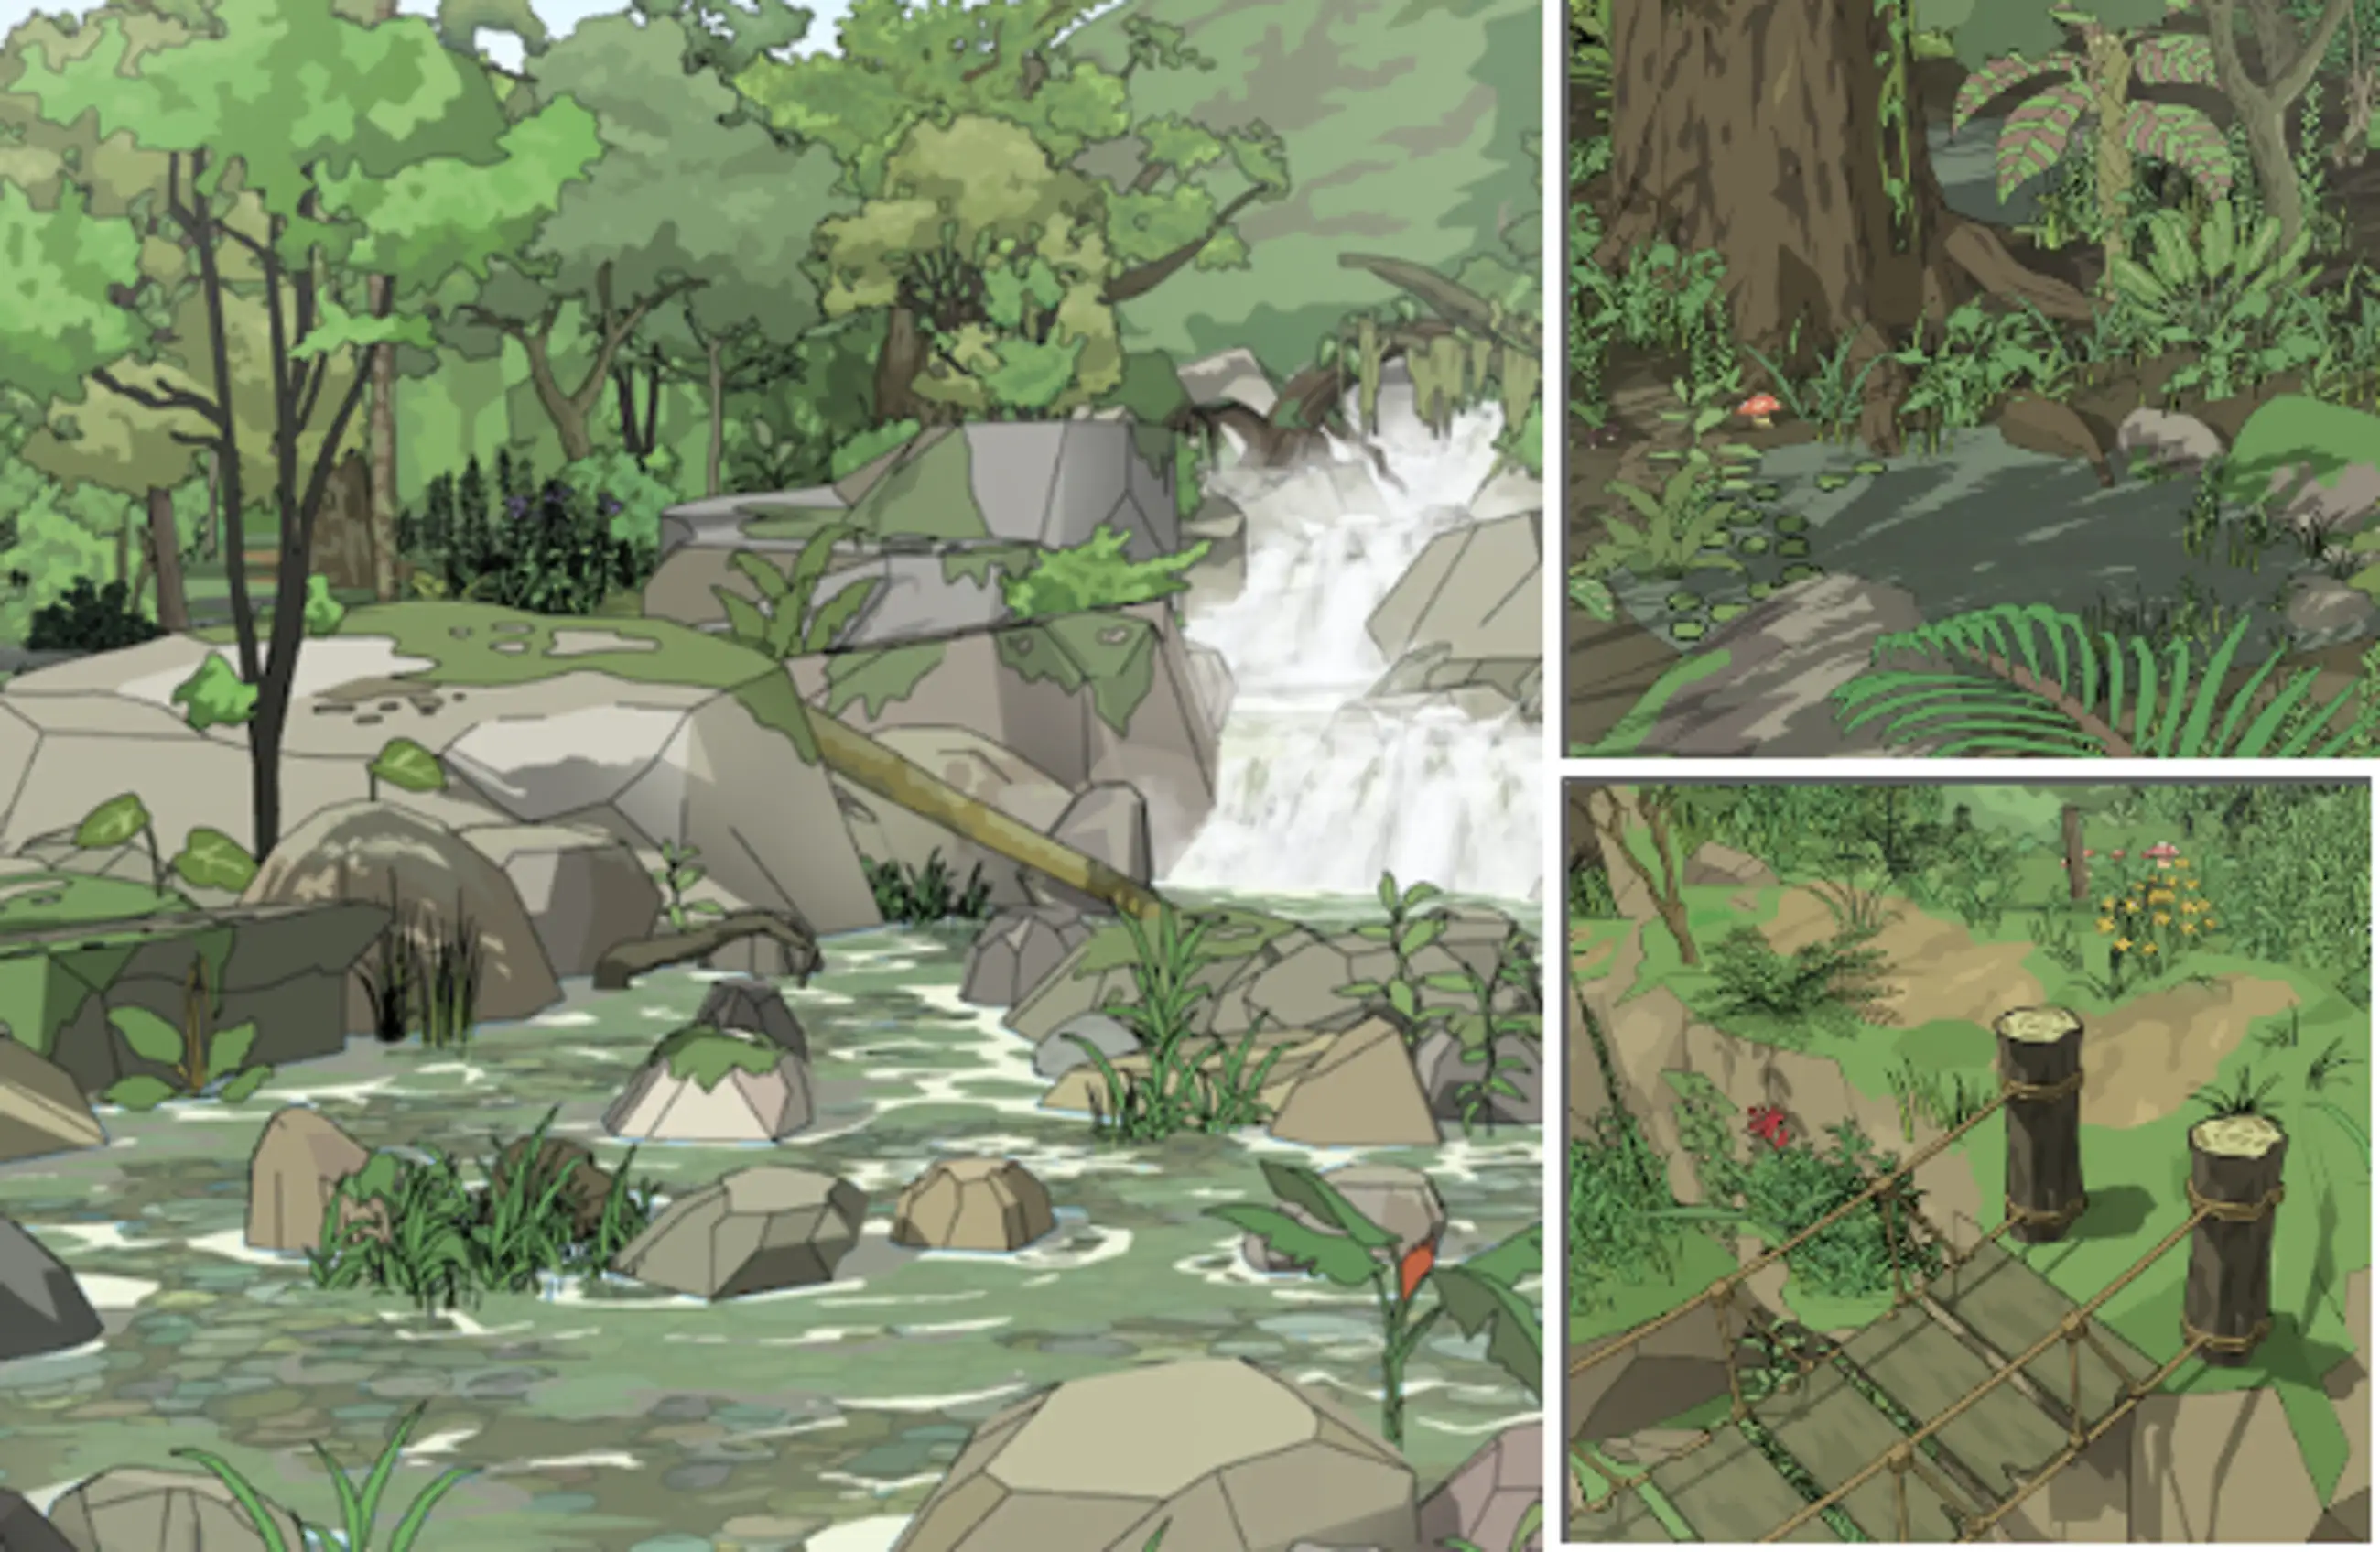 [Sketchup Natural Object & Grass Brush] Optimized for Webtoon Production!